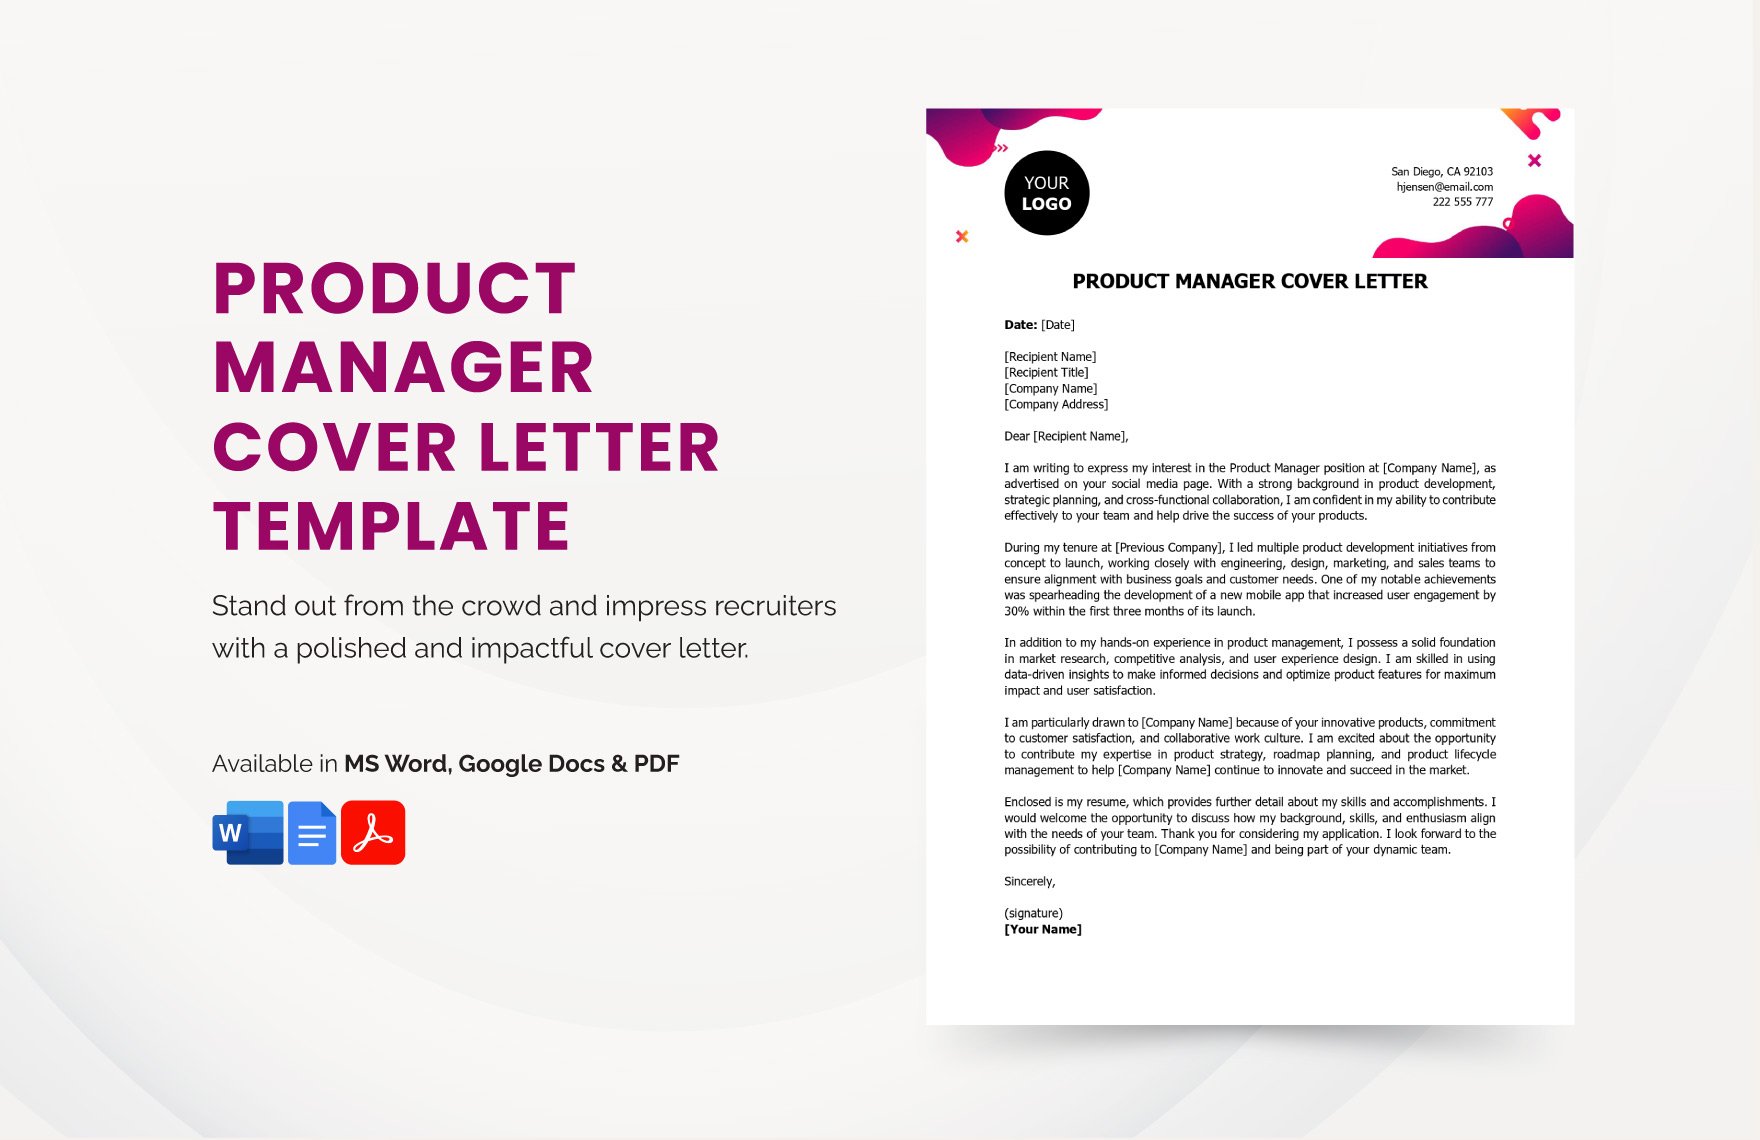 Product Manager Cover Letter Template